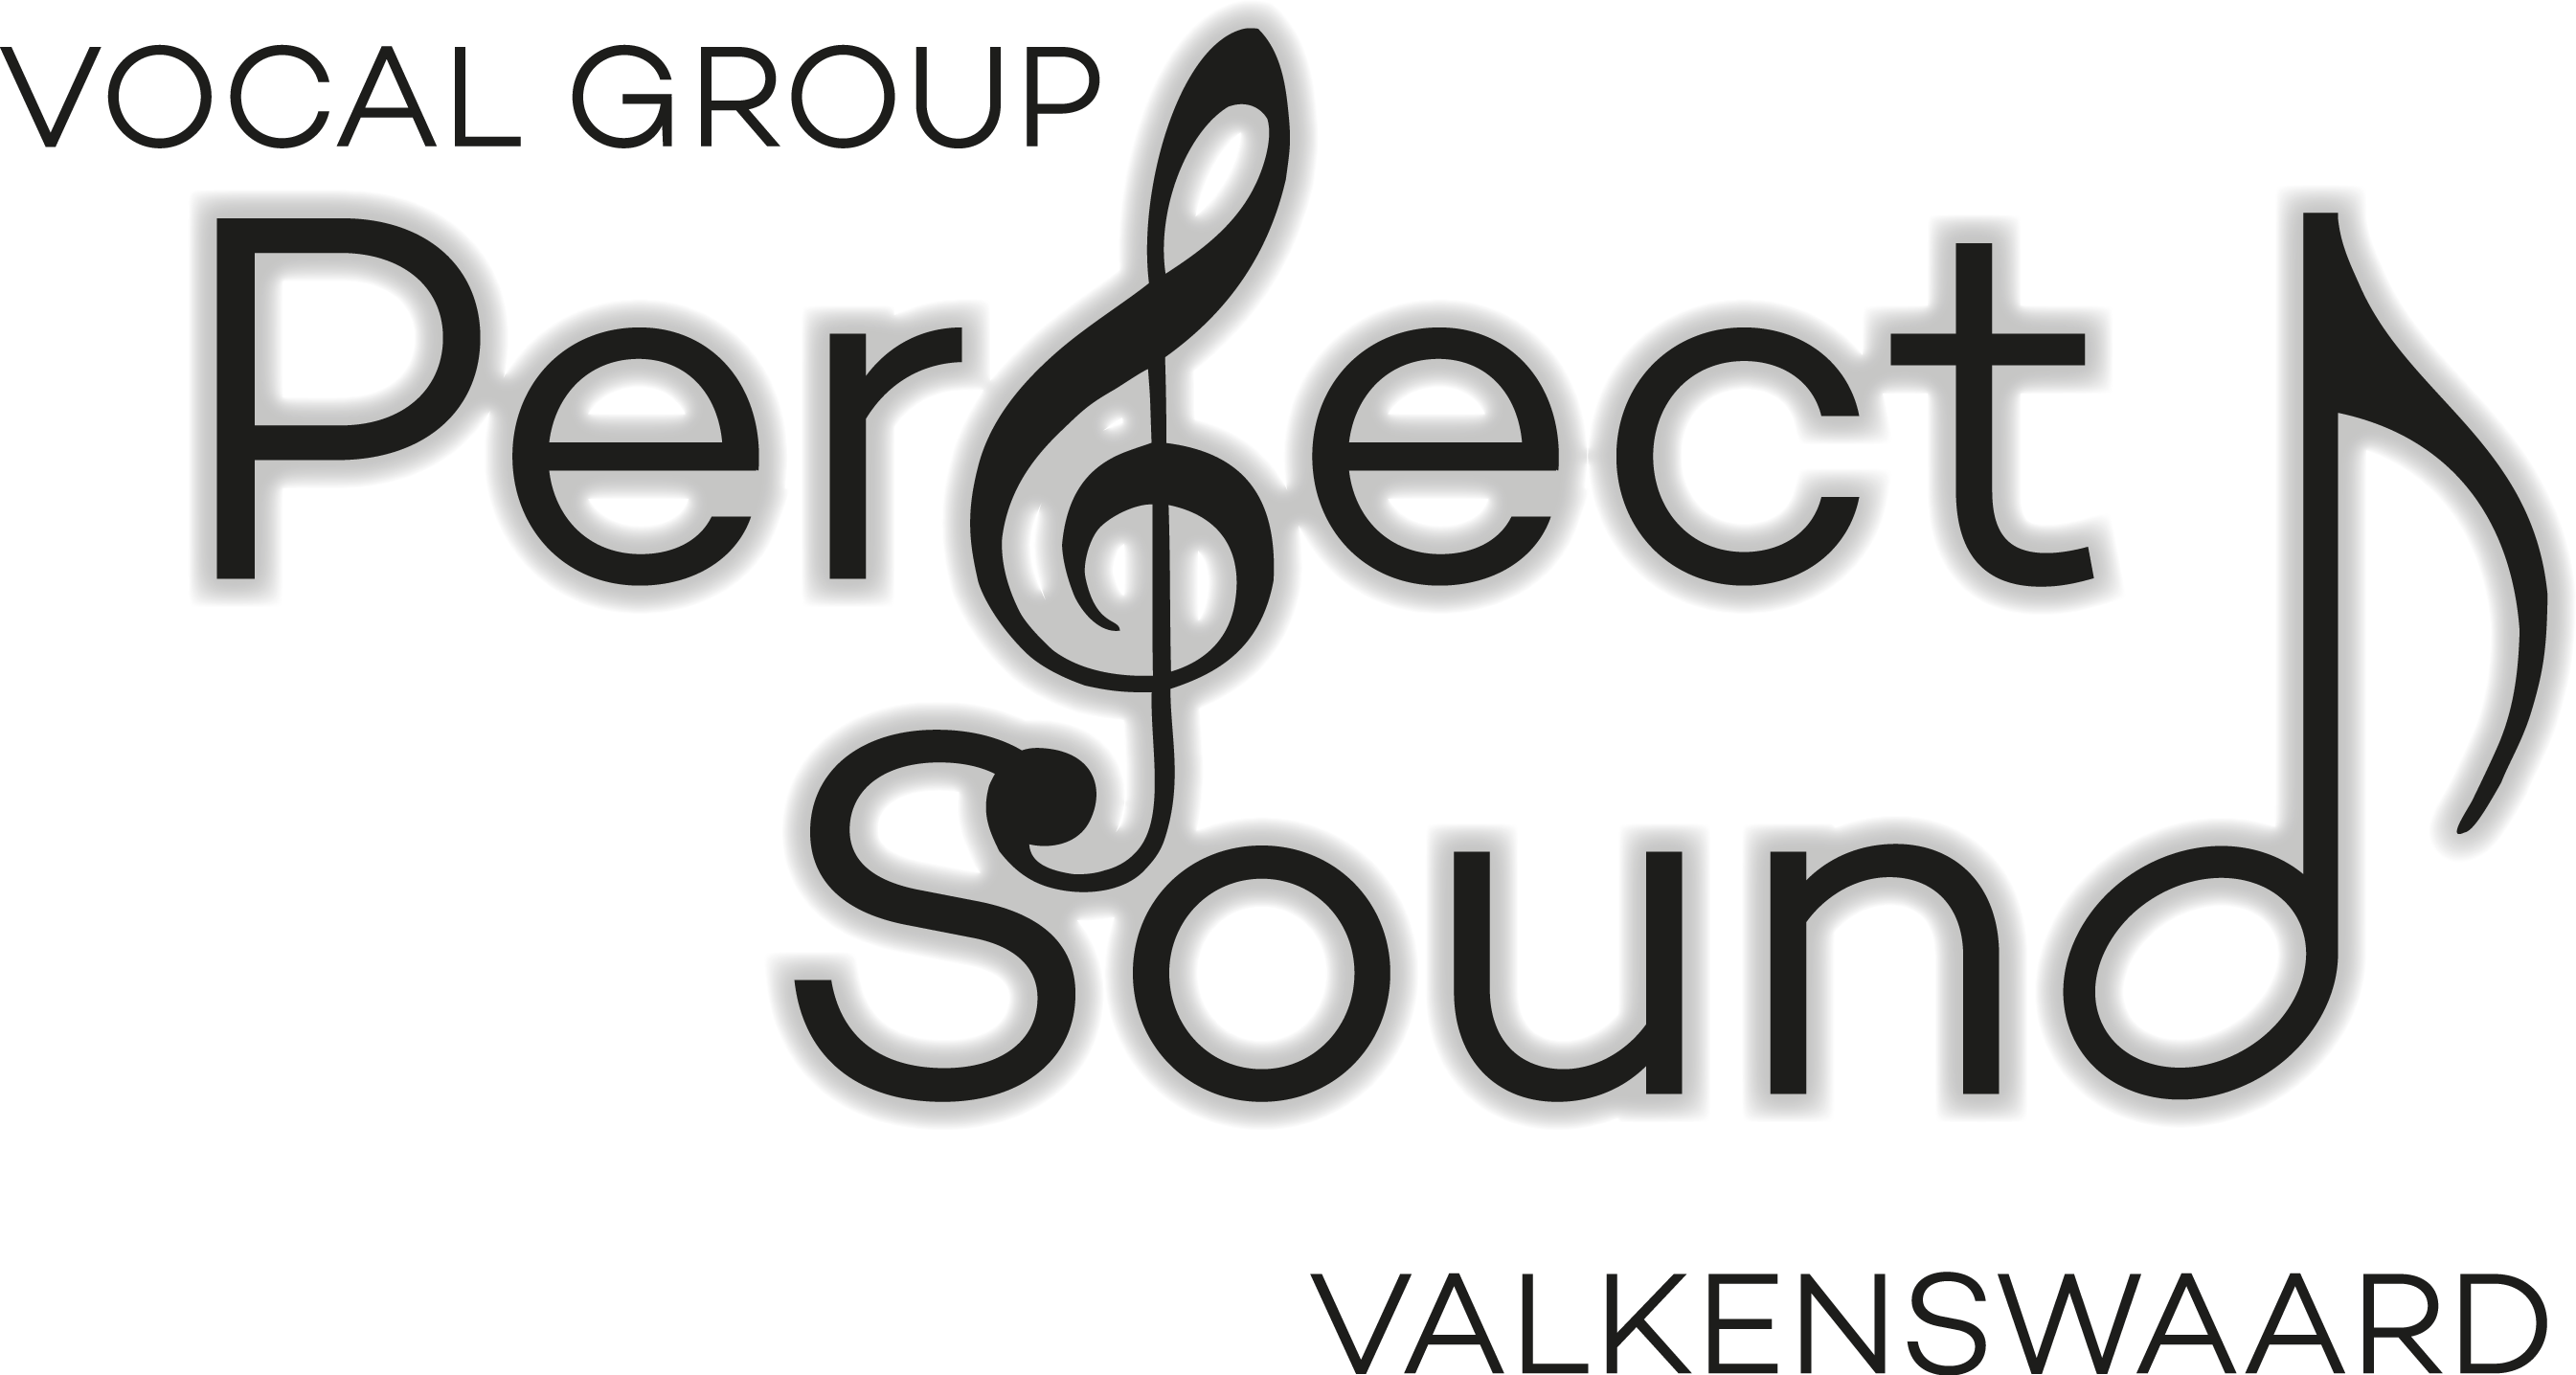 Vocal Group Perfect Sound